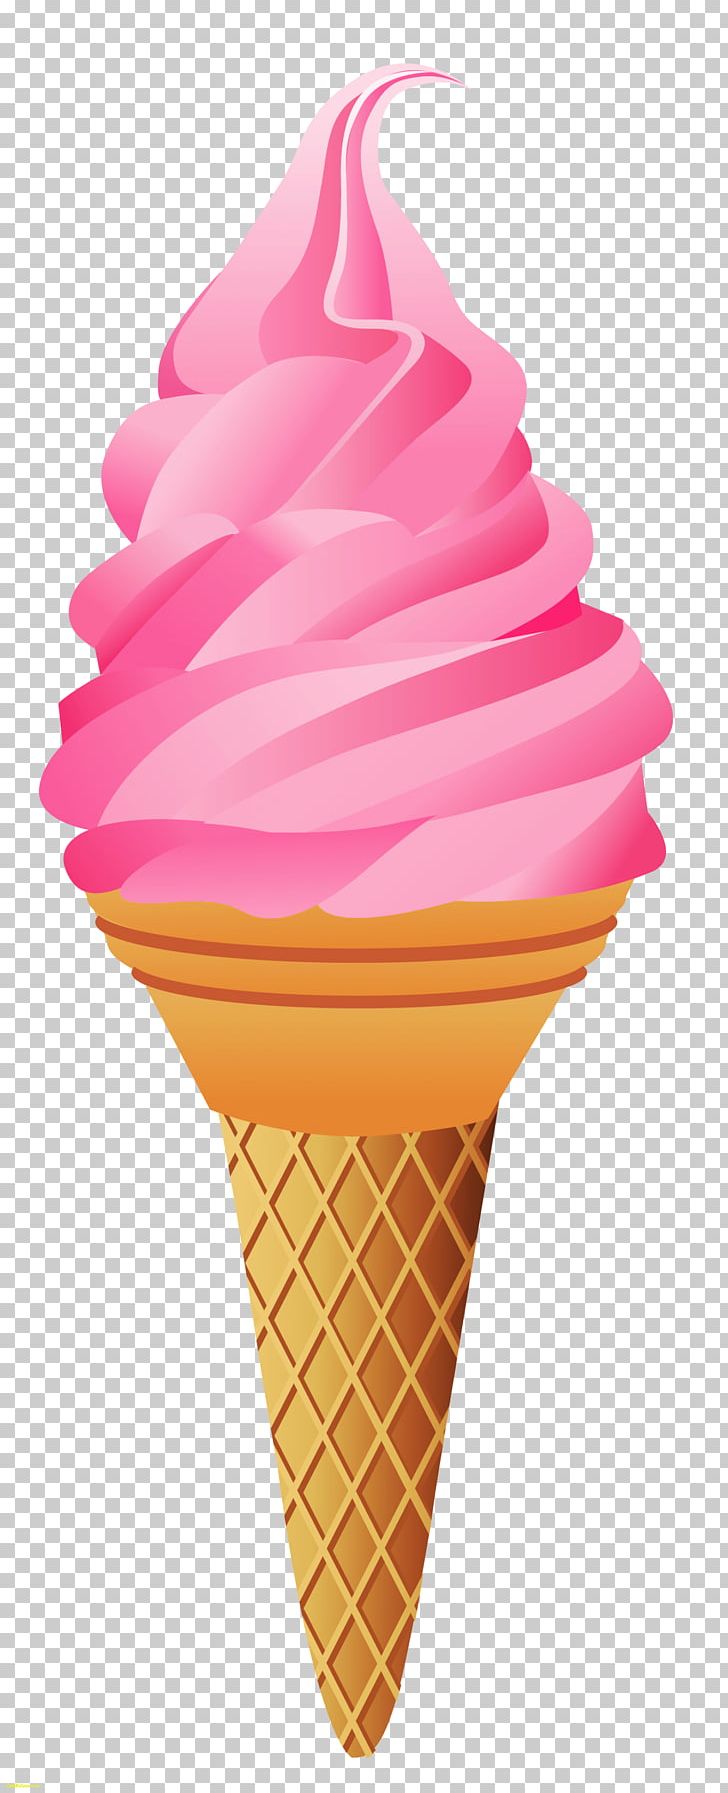 Ice Cream Cones Sundae PNG, Clipart, Chocolate Ice Cream, Chocolate Syrup, Cream, Dessert, Dondurma Free PNG Download